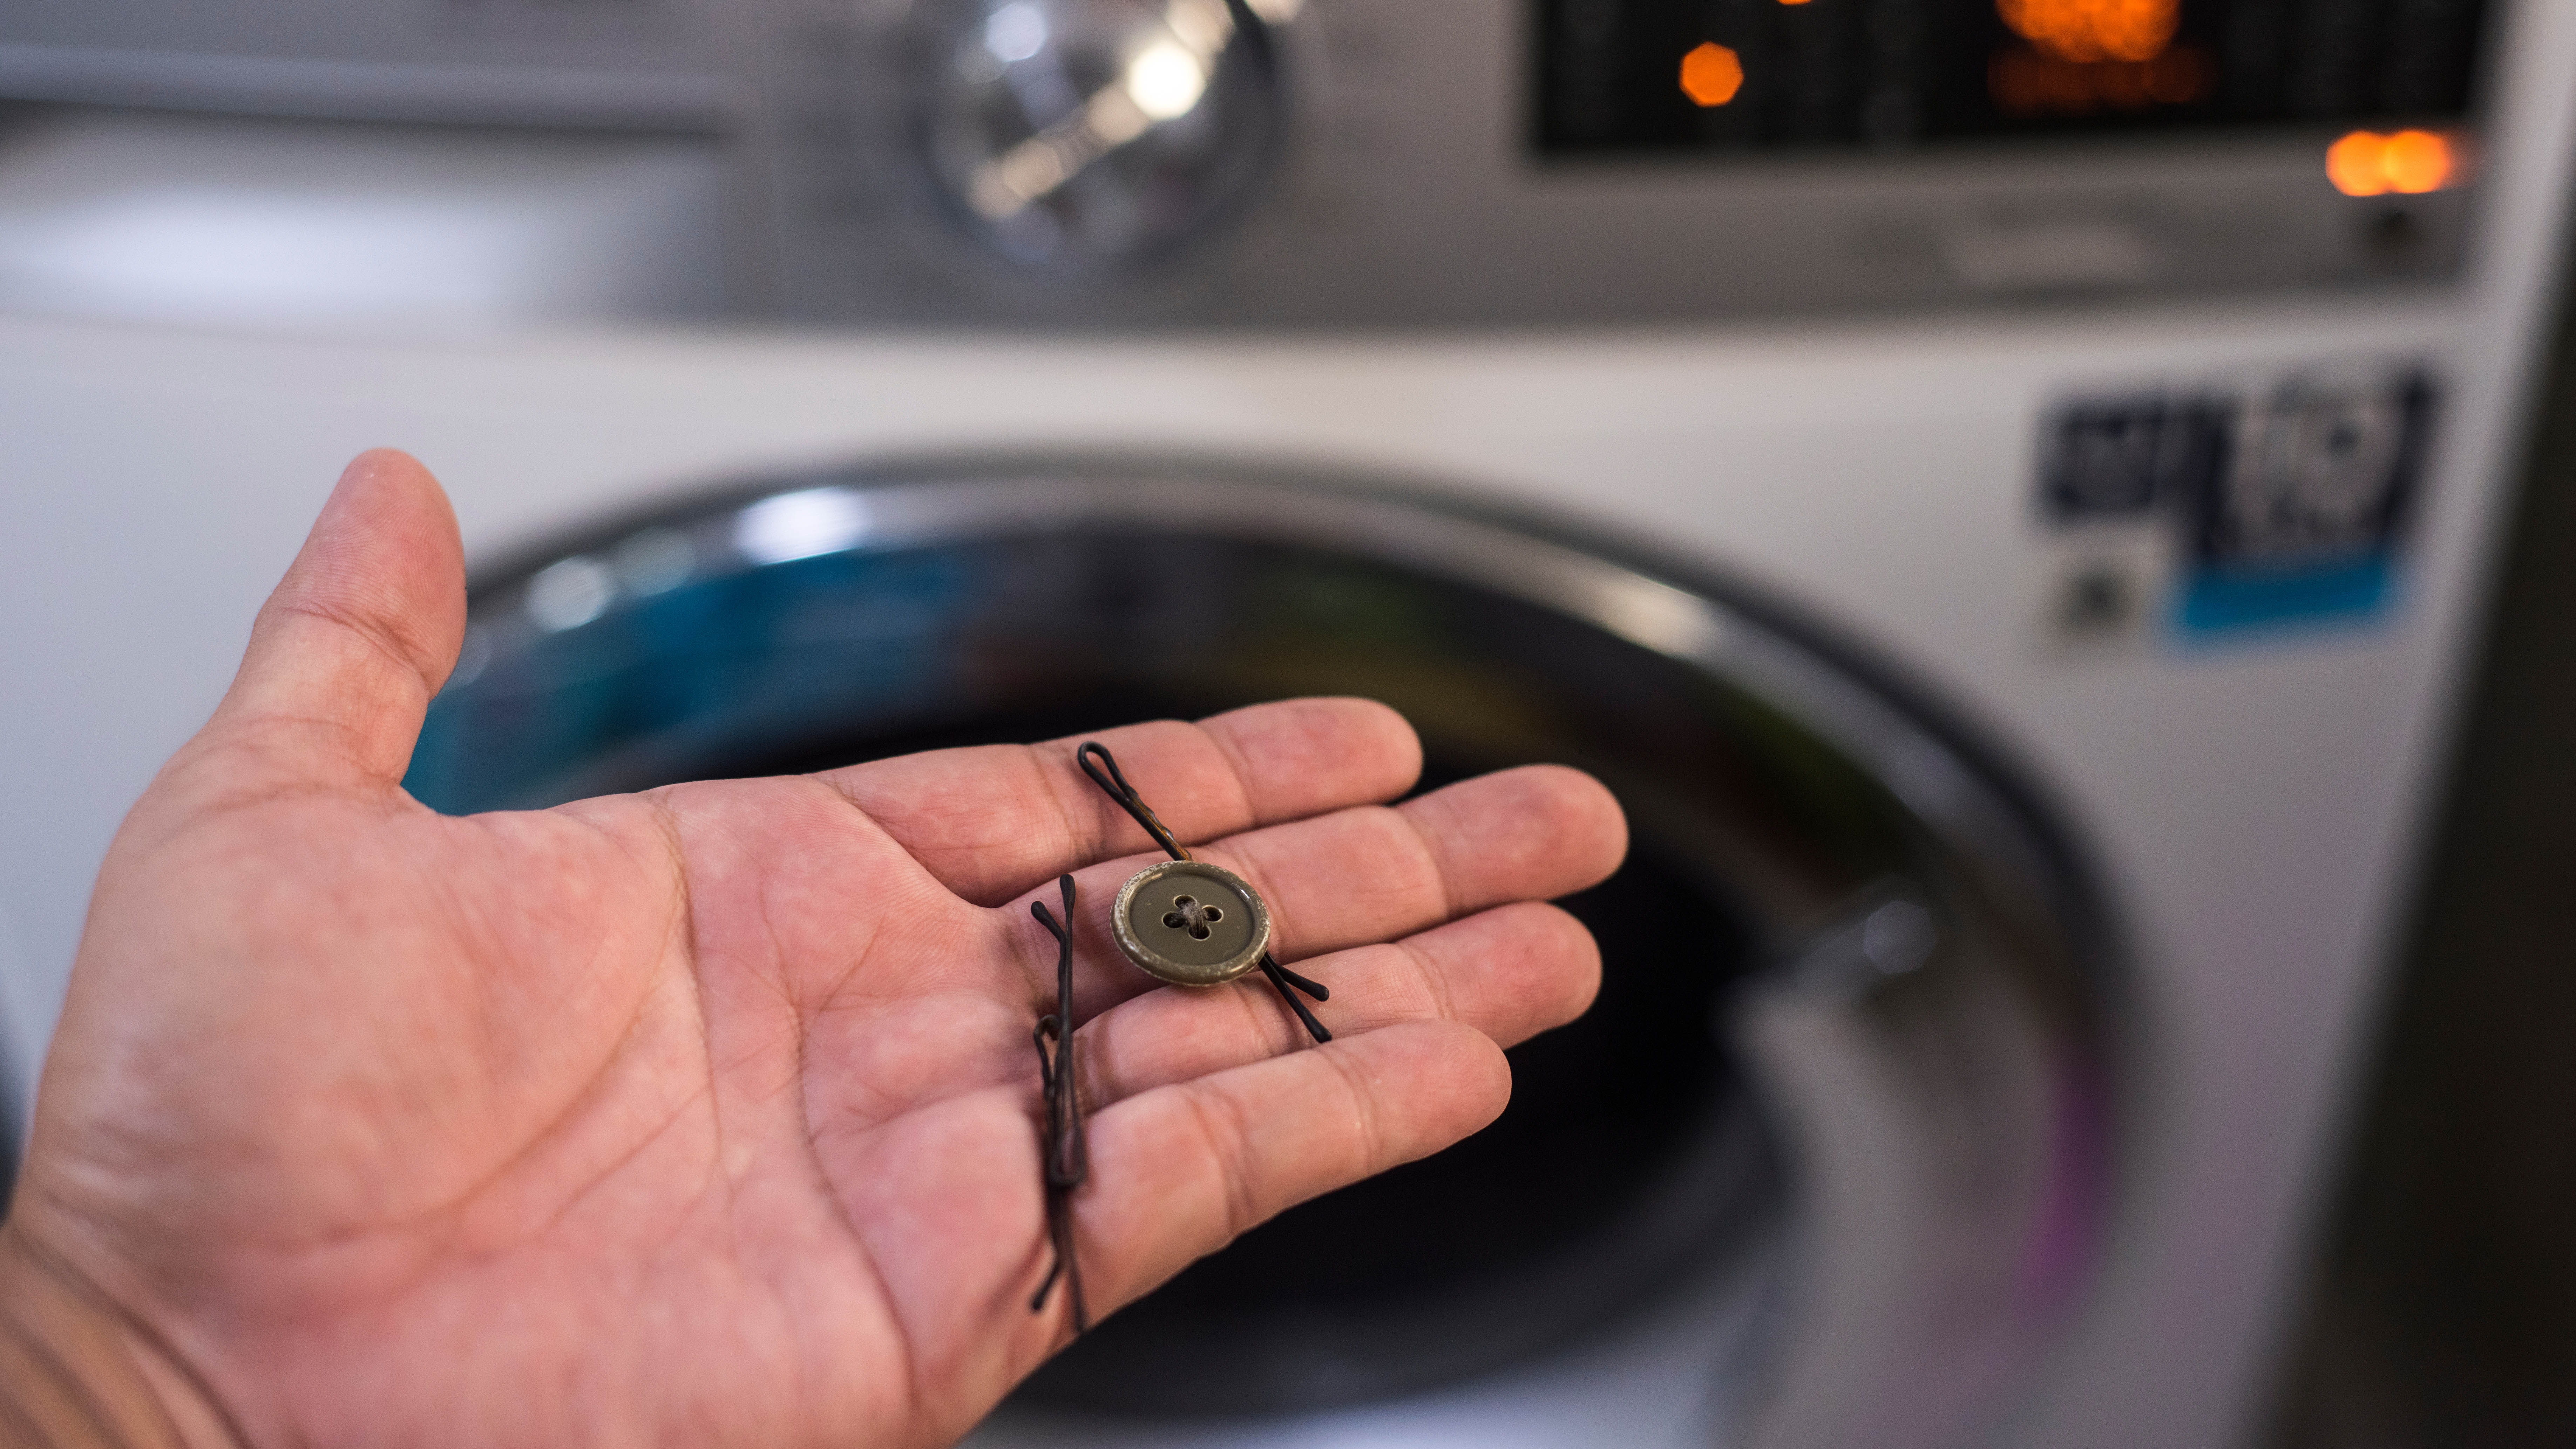 someone holding a hair clip and a button in front of the washer